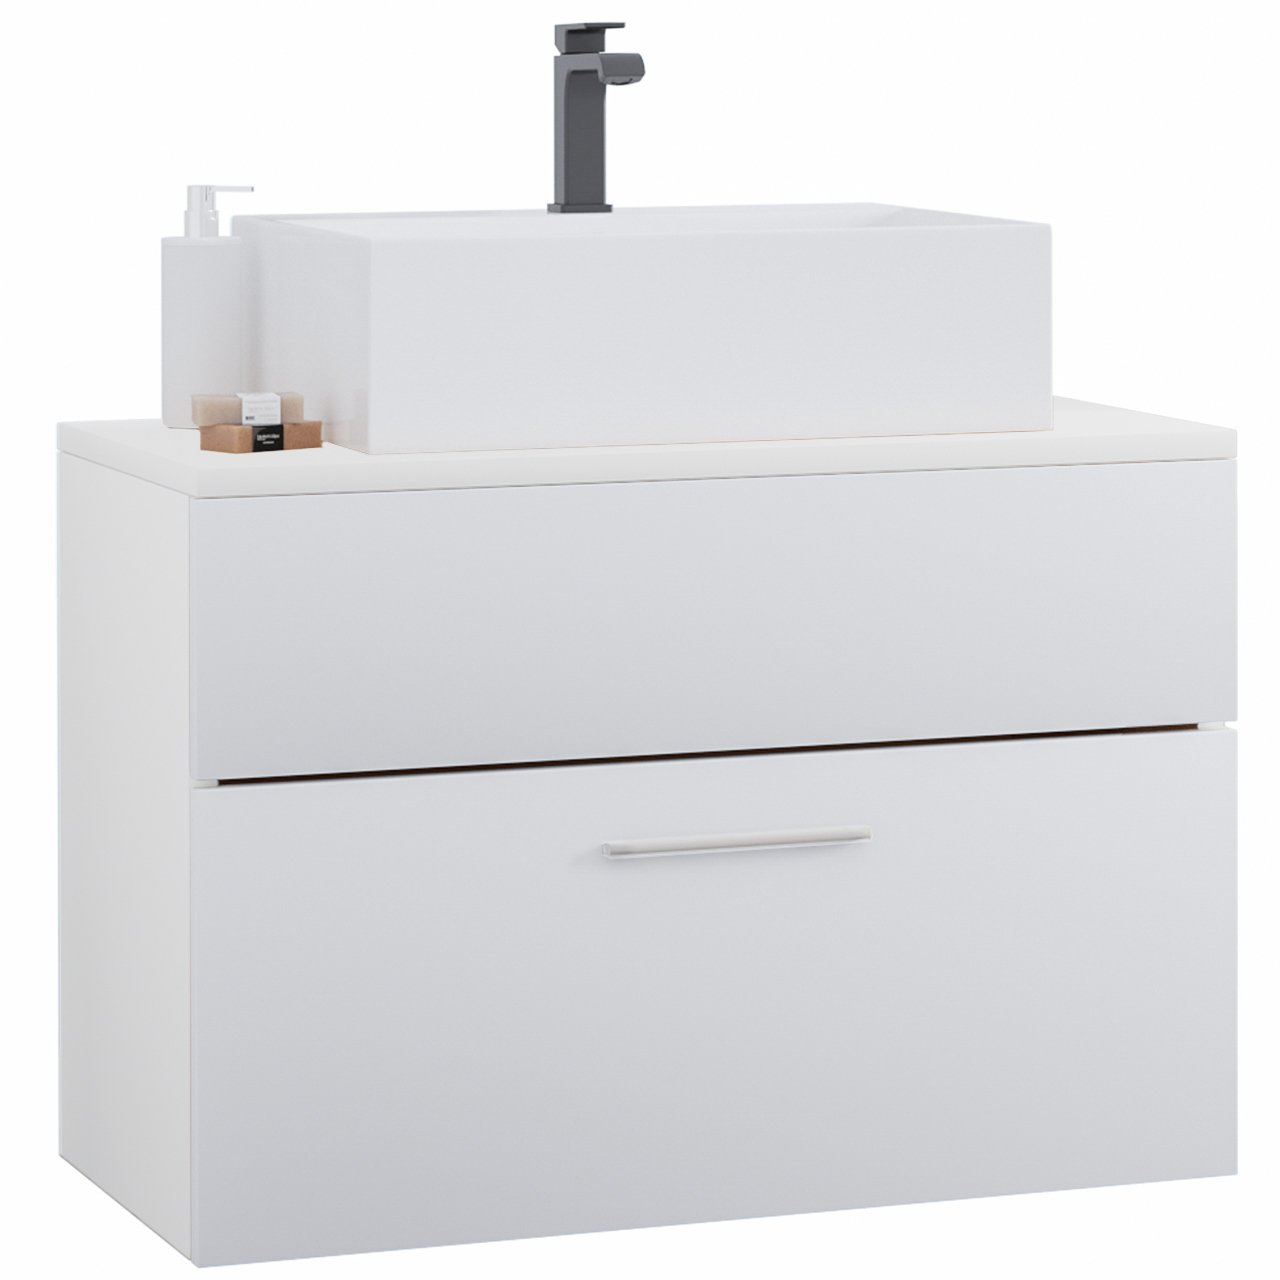 Vanity Unit with Countertop LUPO LP7 white laminate